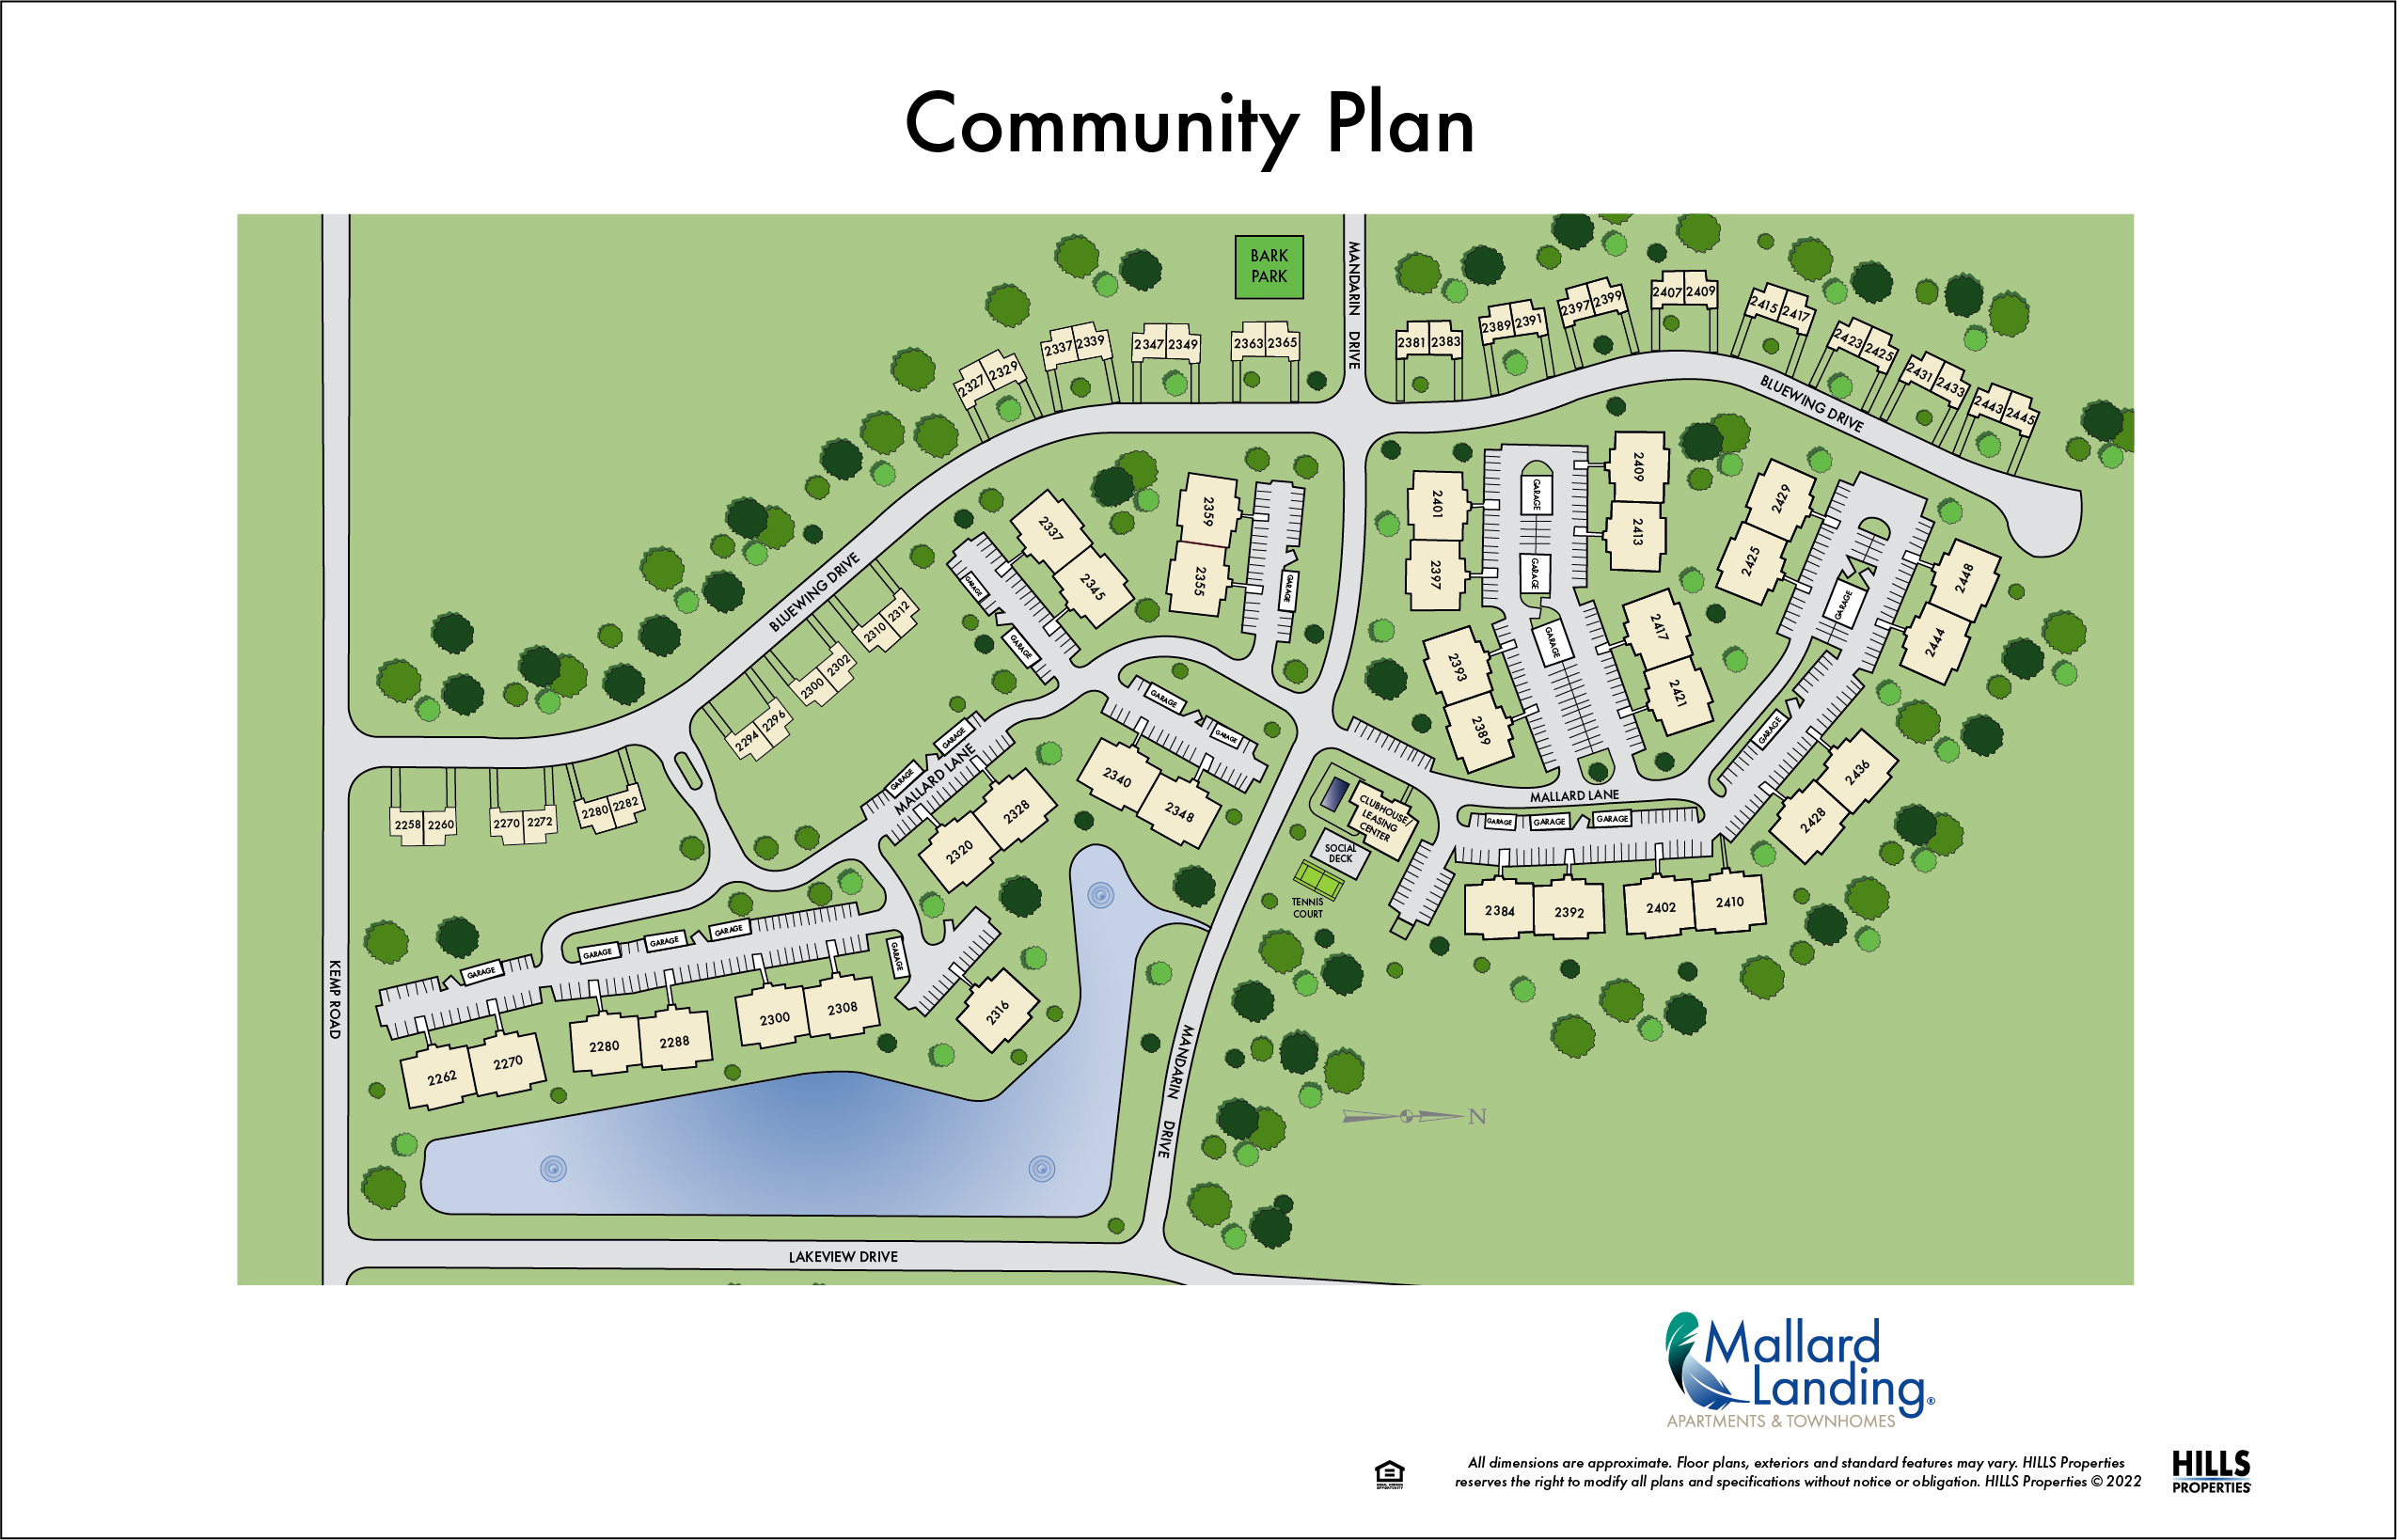 A map of the Mallard Landing apartment complex featuring all buildings and parking options.